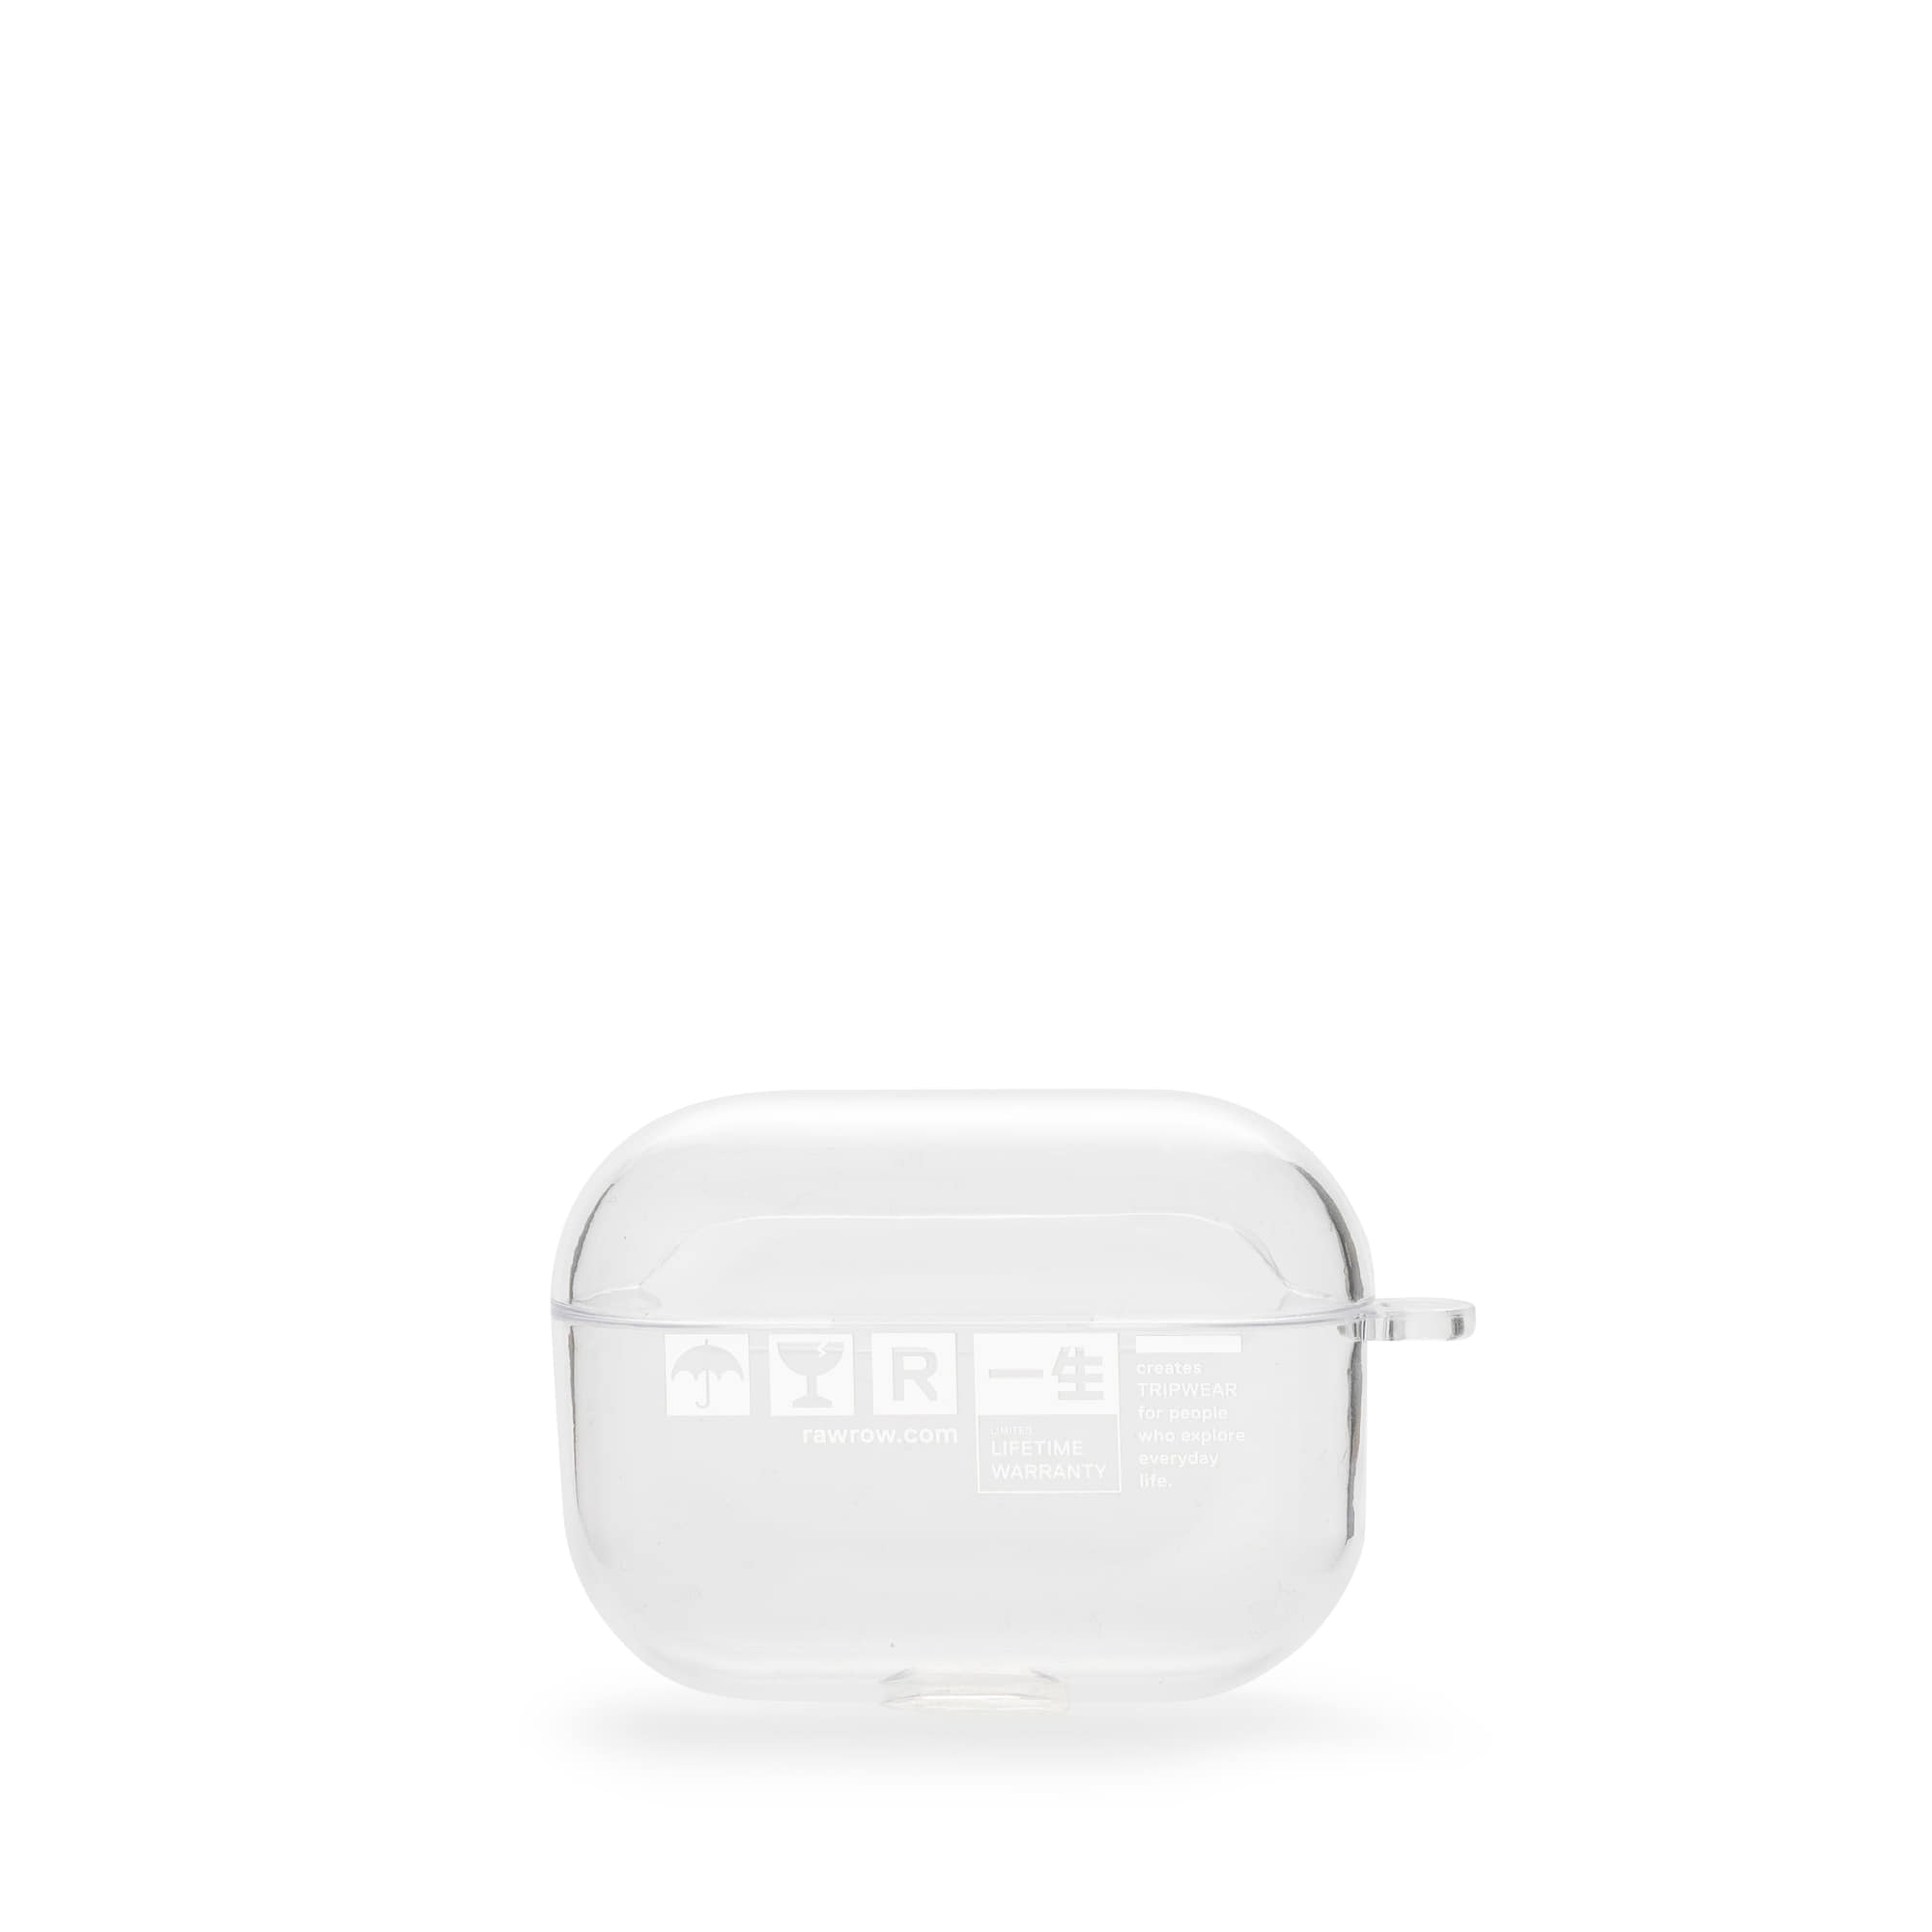 AIRPODS PRO CASE 251